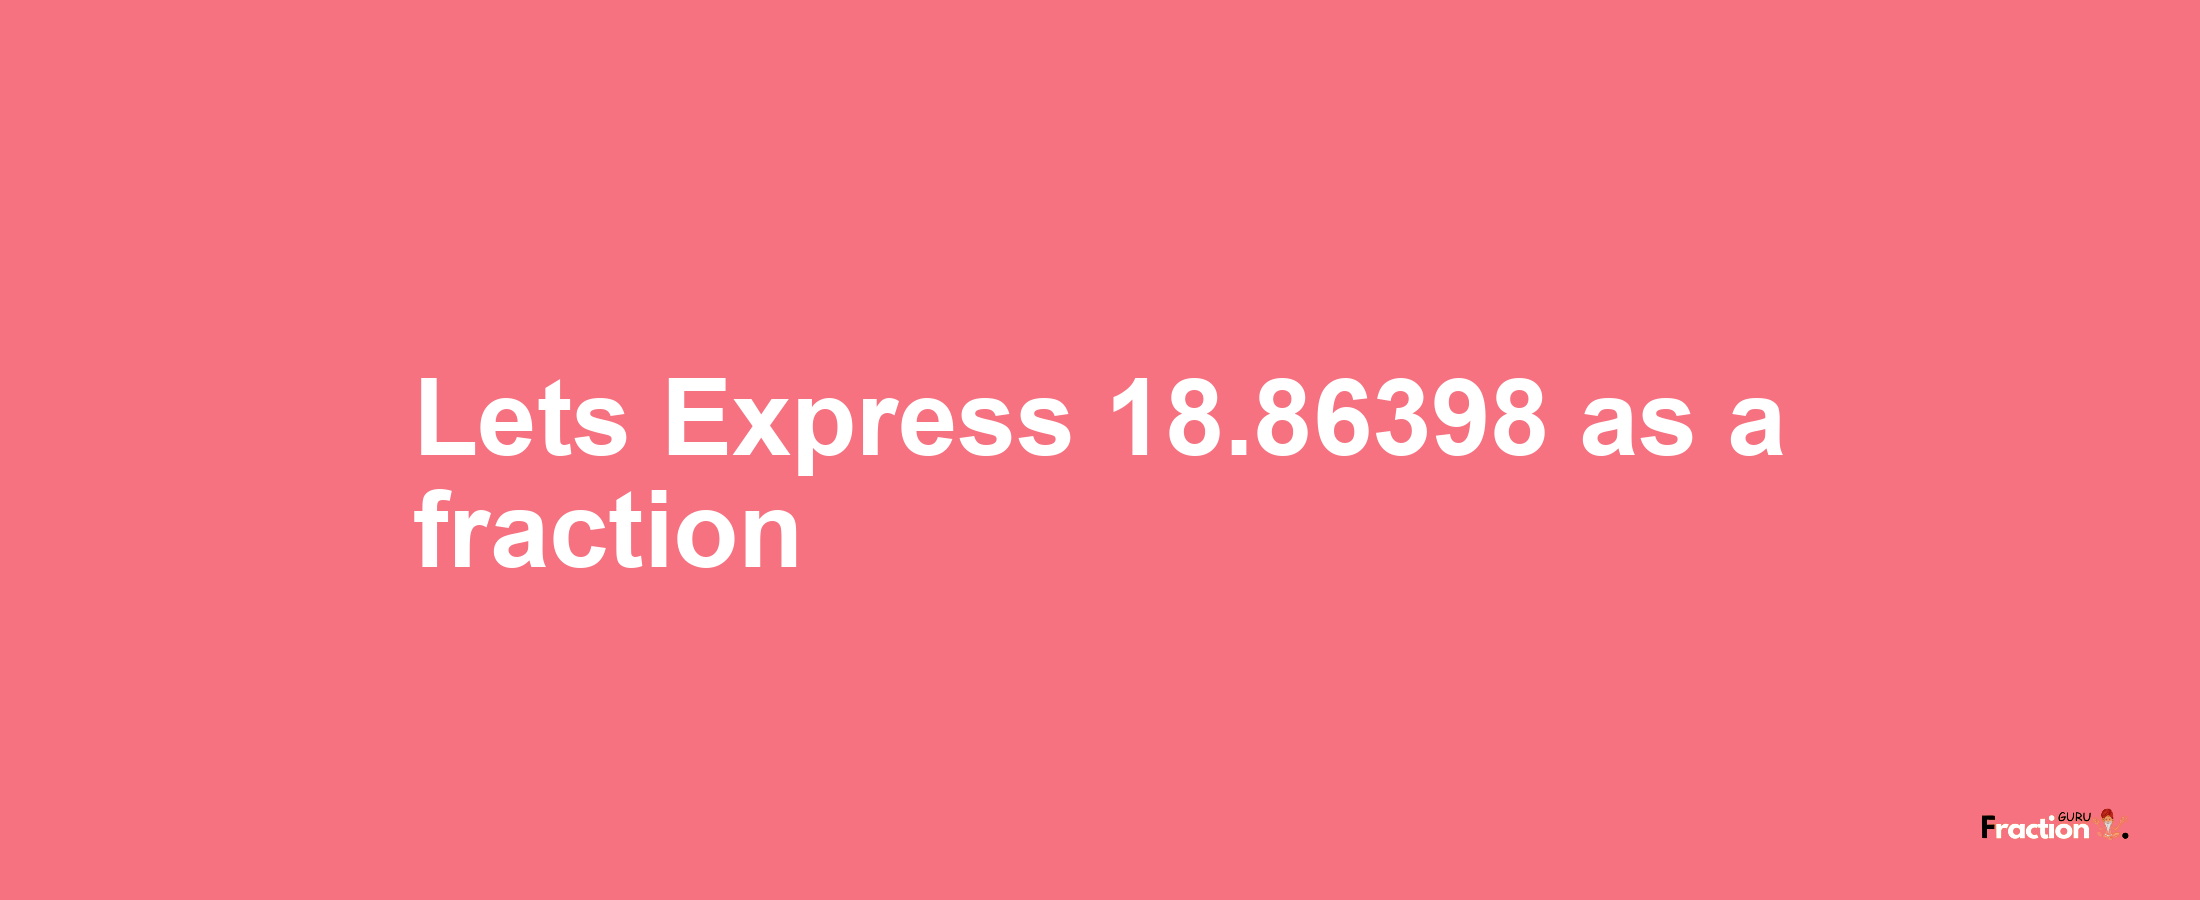 Lets Express 18.86398 as afraction